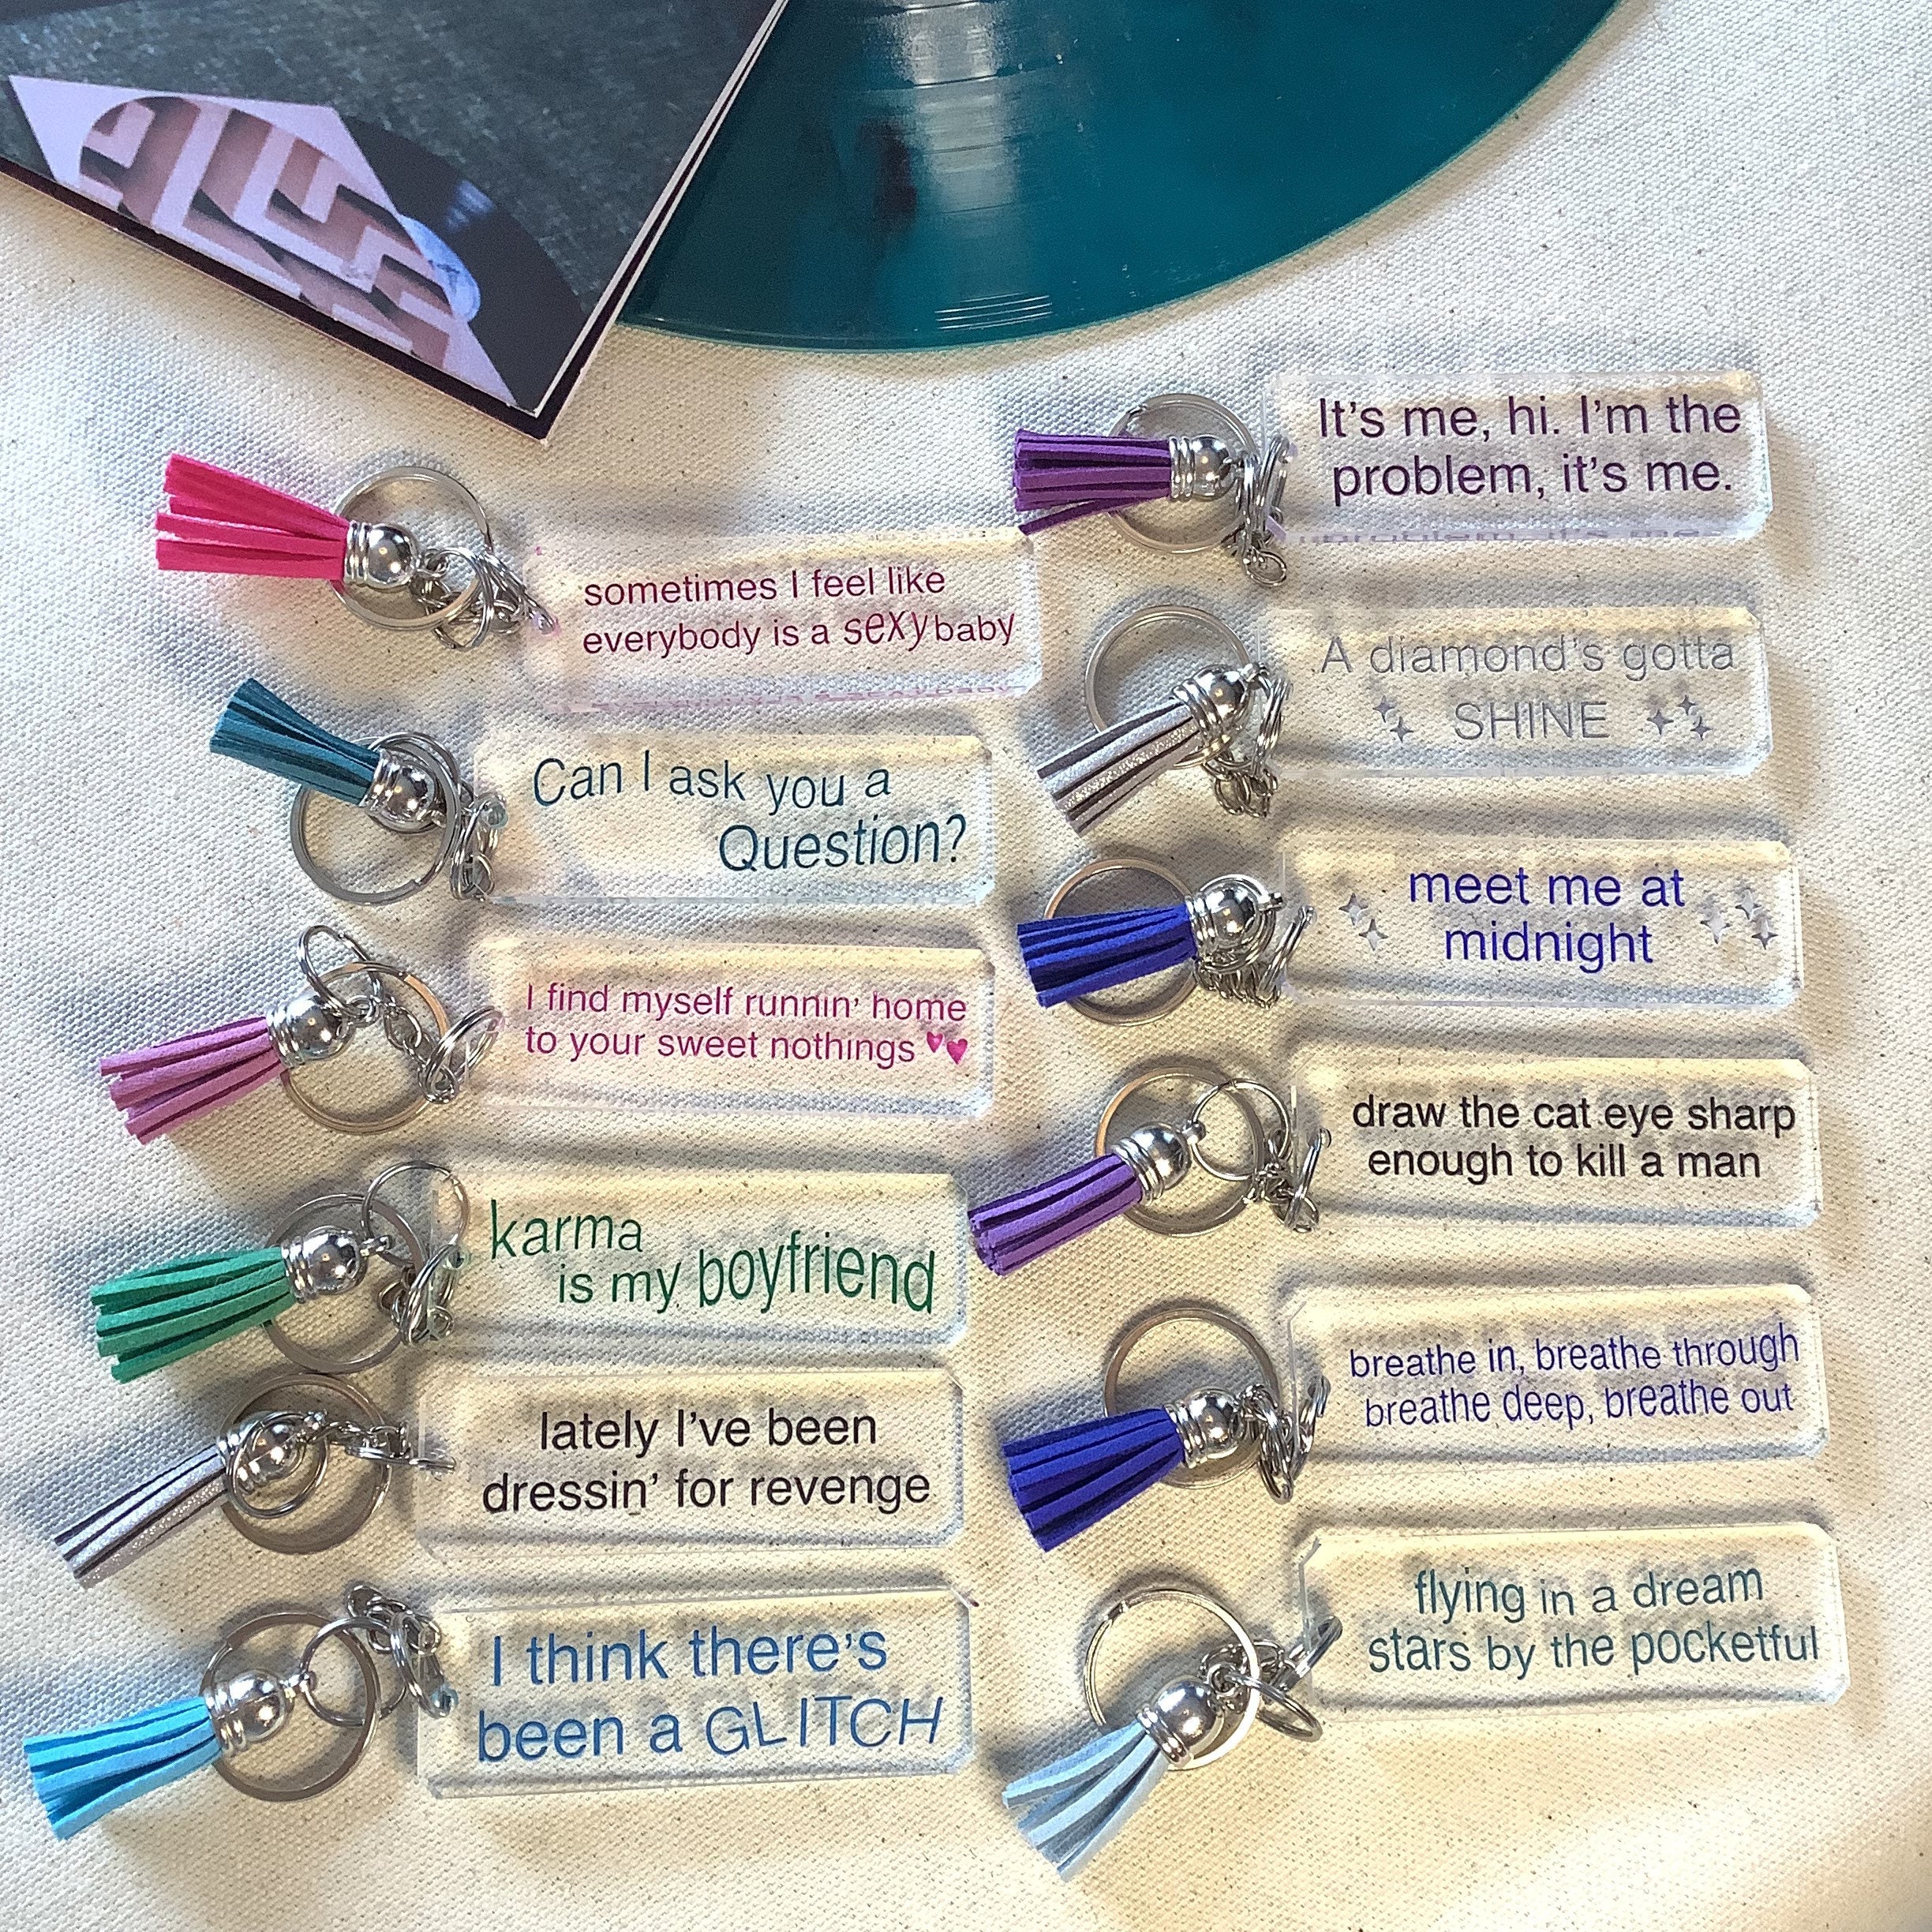 Taylor Swift Folklore and Evermore Keychains, Taylors Version, Trilogy,  Eras 